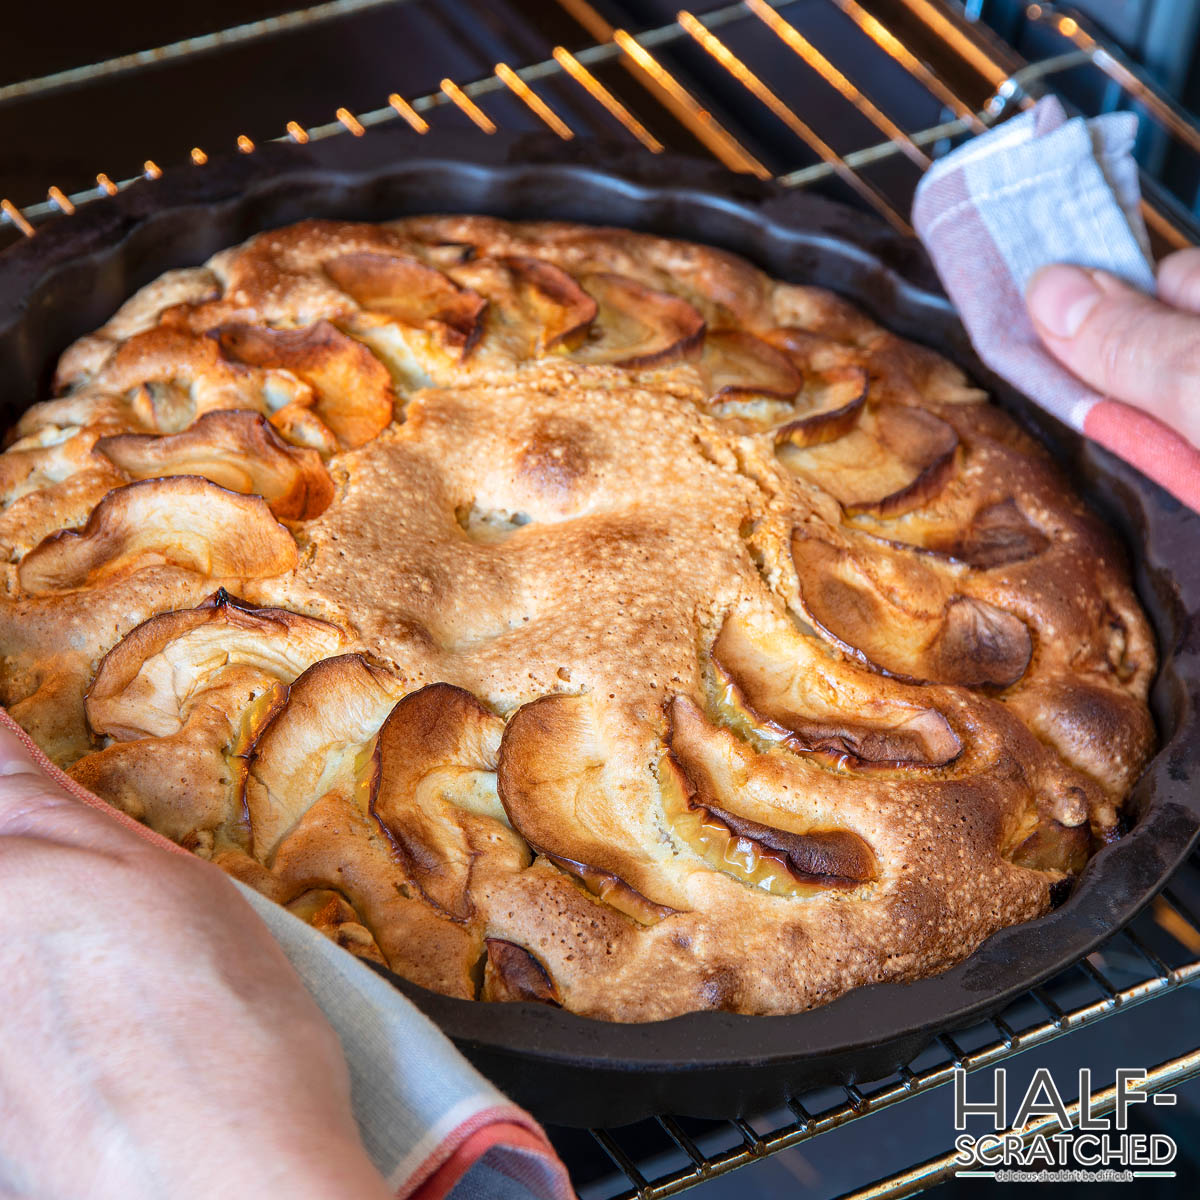 Oven baked apple pie at 375 F